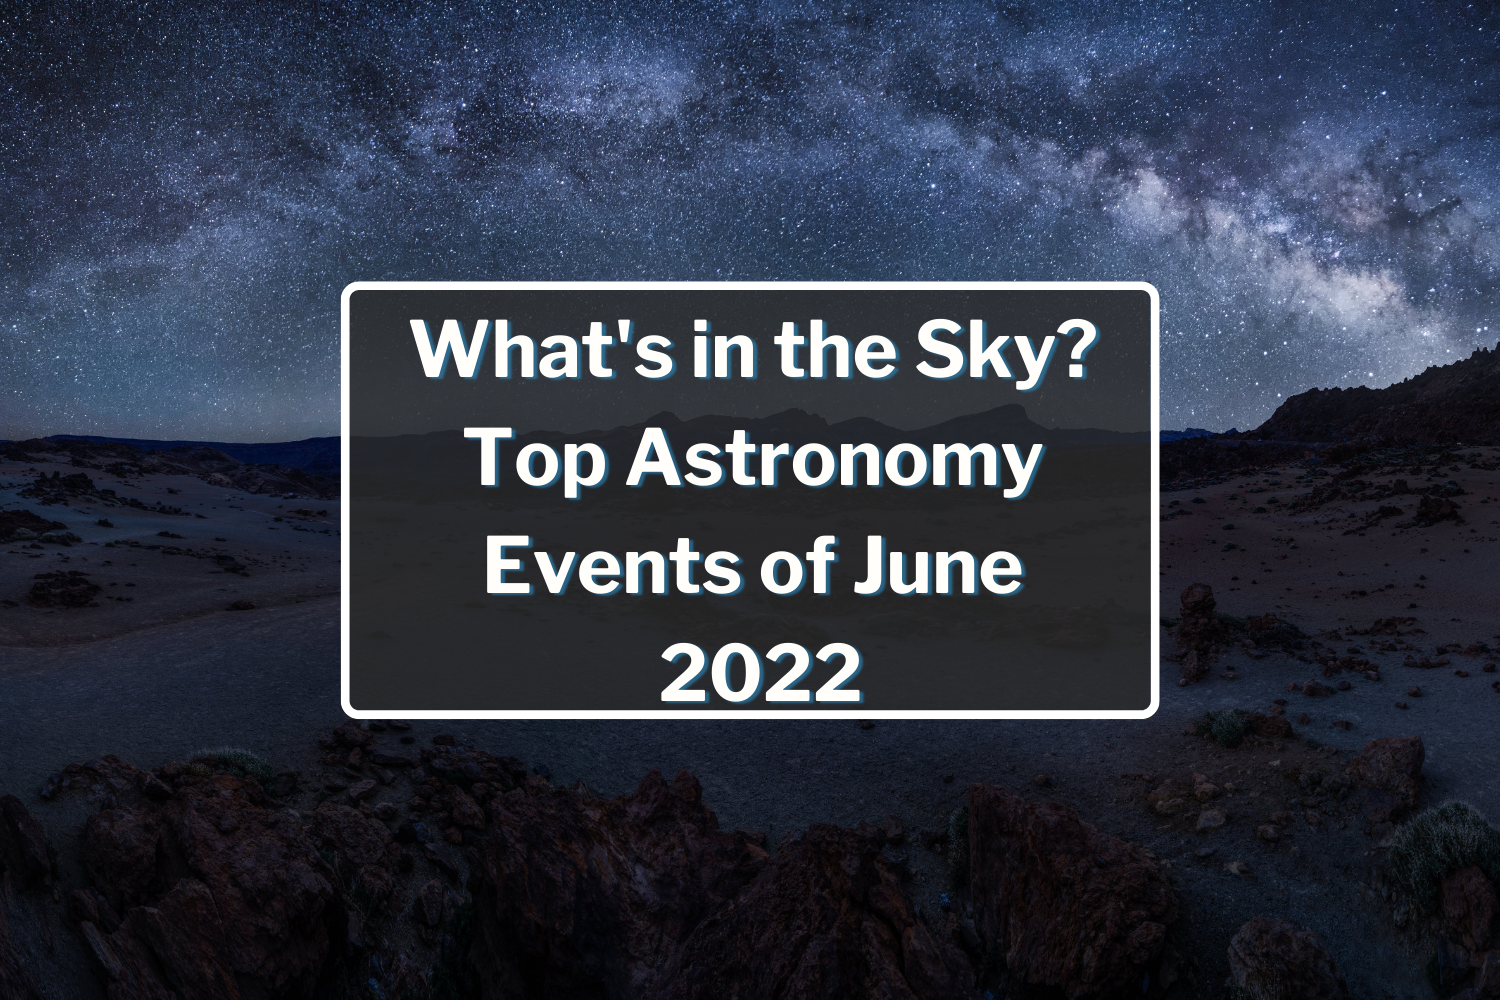 What's in the Sky: Top Astronomy Events of June 2022